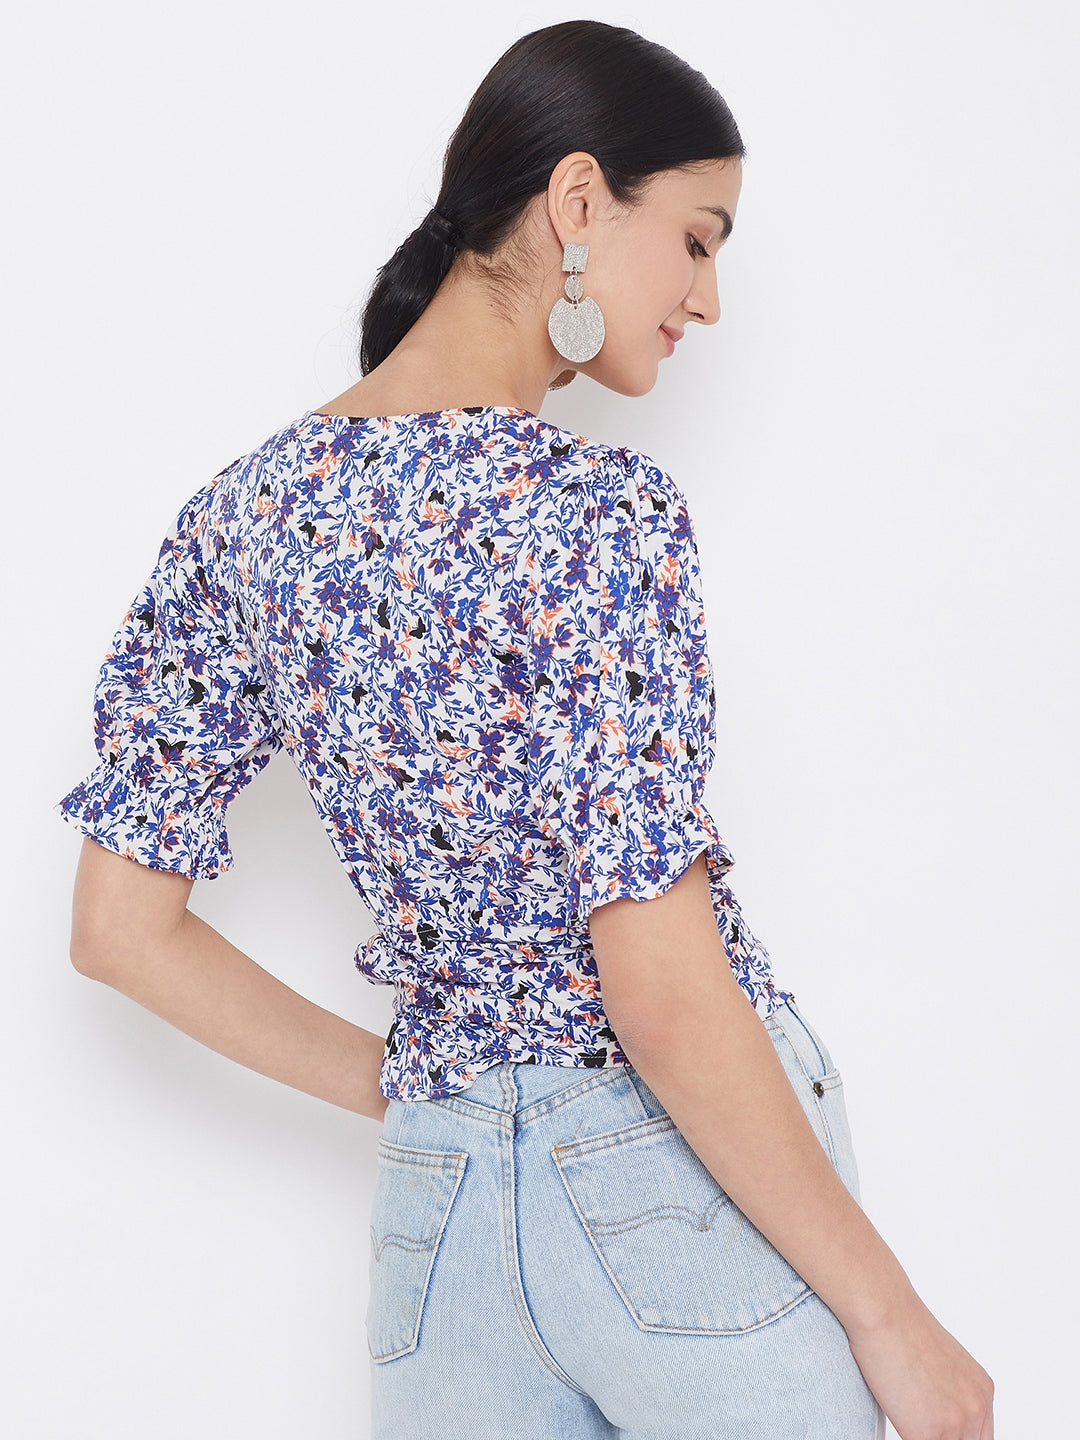 Berrylush Women White Floral Printed Puffed Sleeves Tie Knot Top